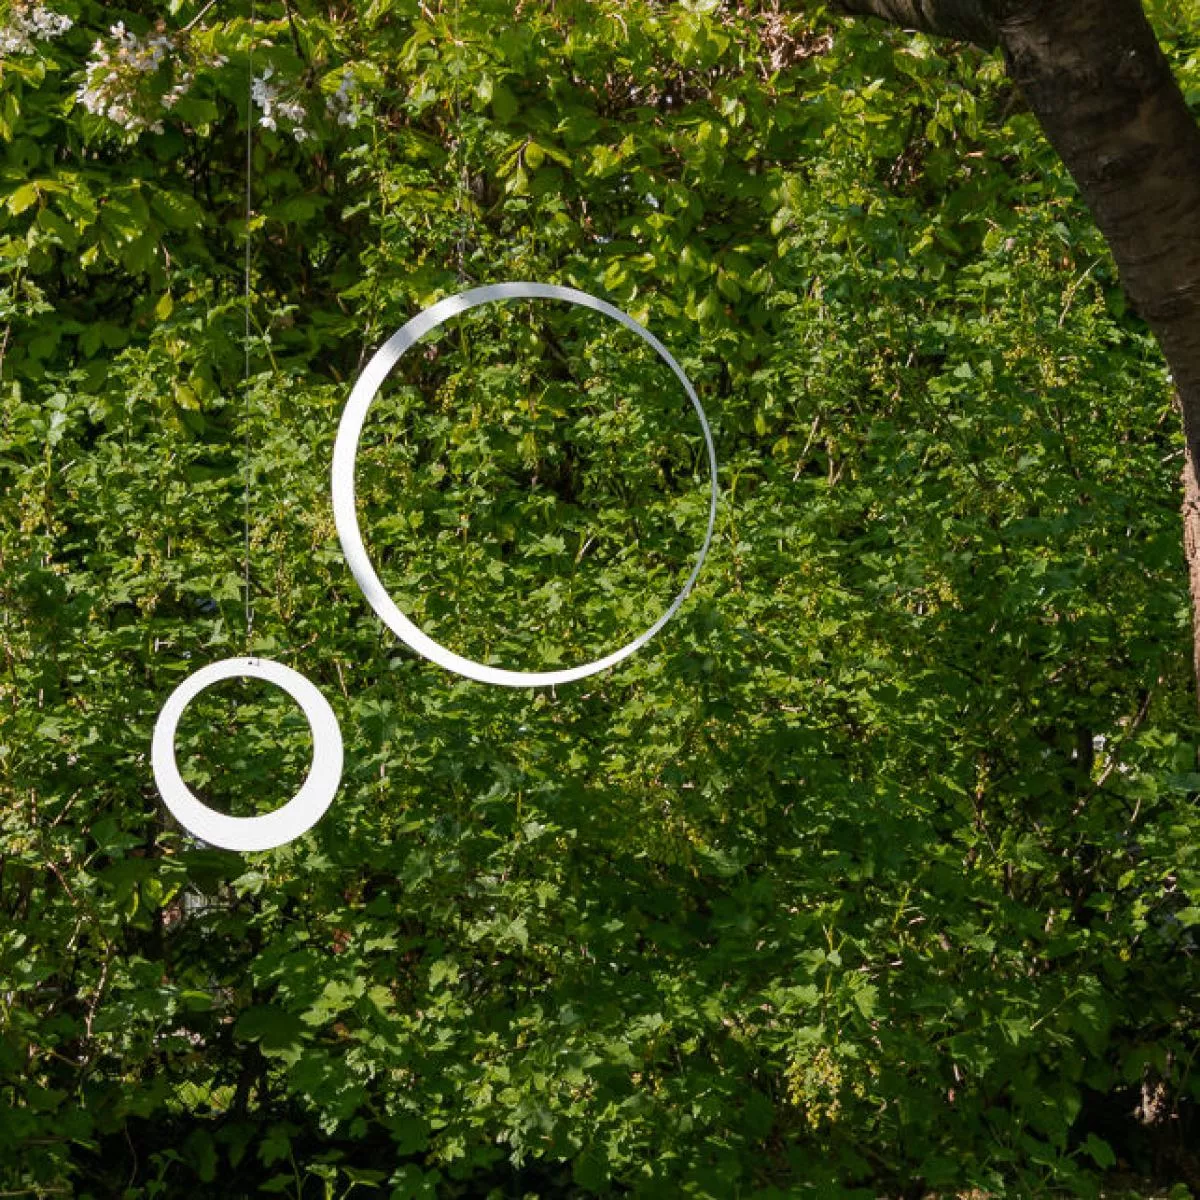 Smallest and largest version in white: Garden mobile ring